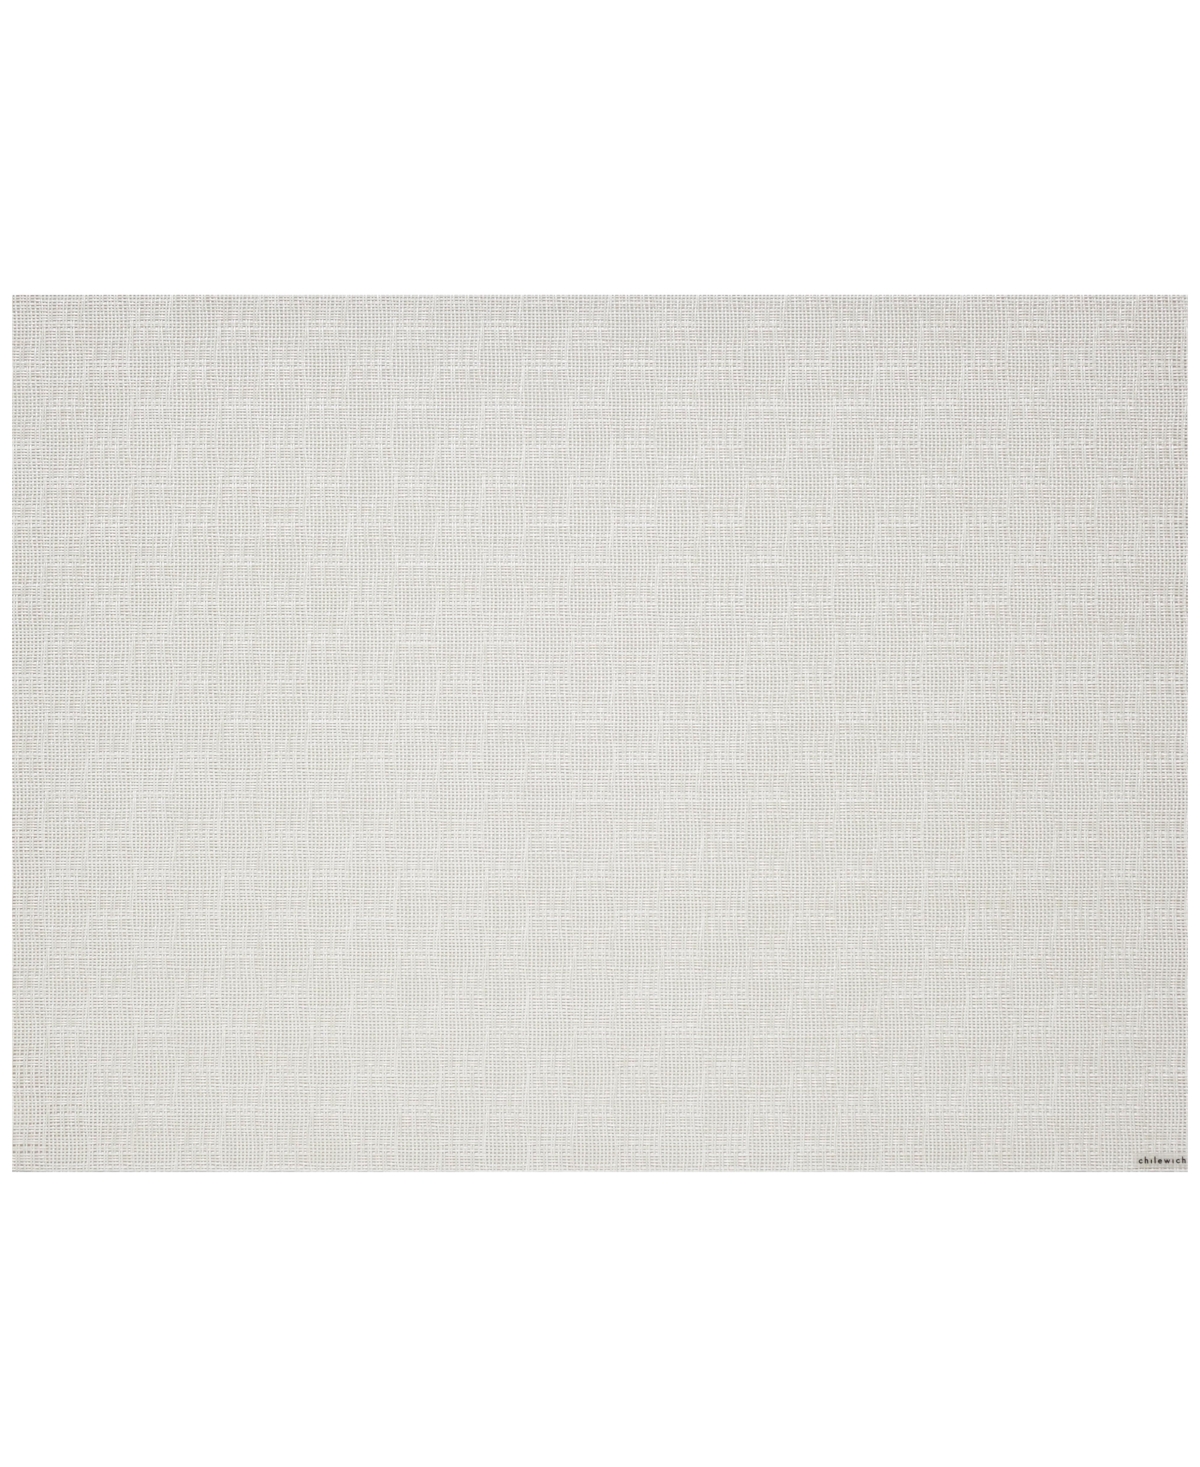 14906795 Chilewhich Bayweave Table Mat 14x 19.25 sku 14906795